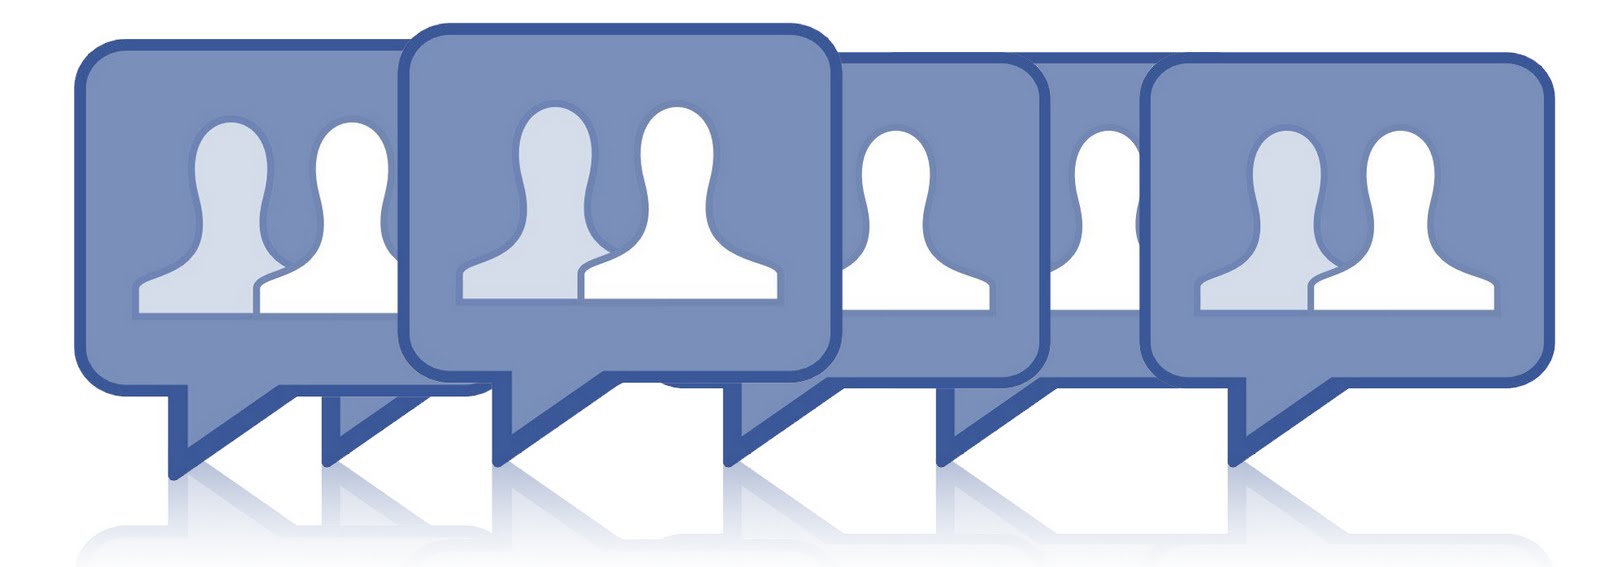 facebook-group-icons